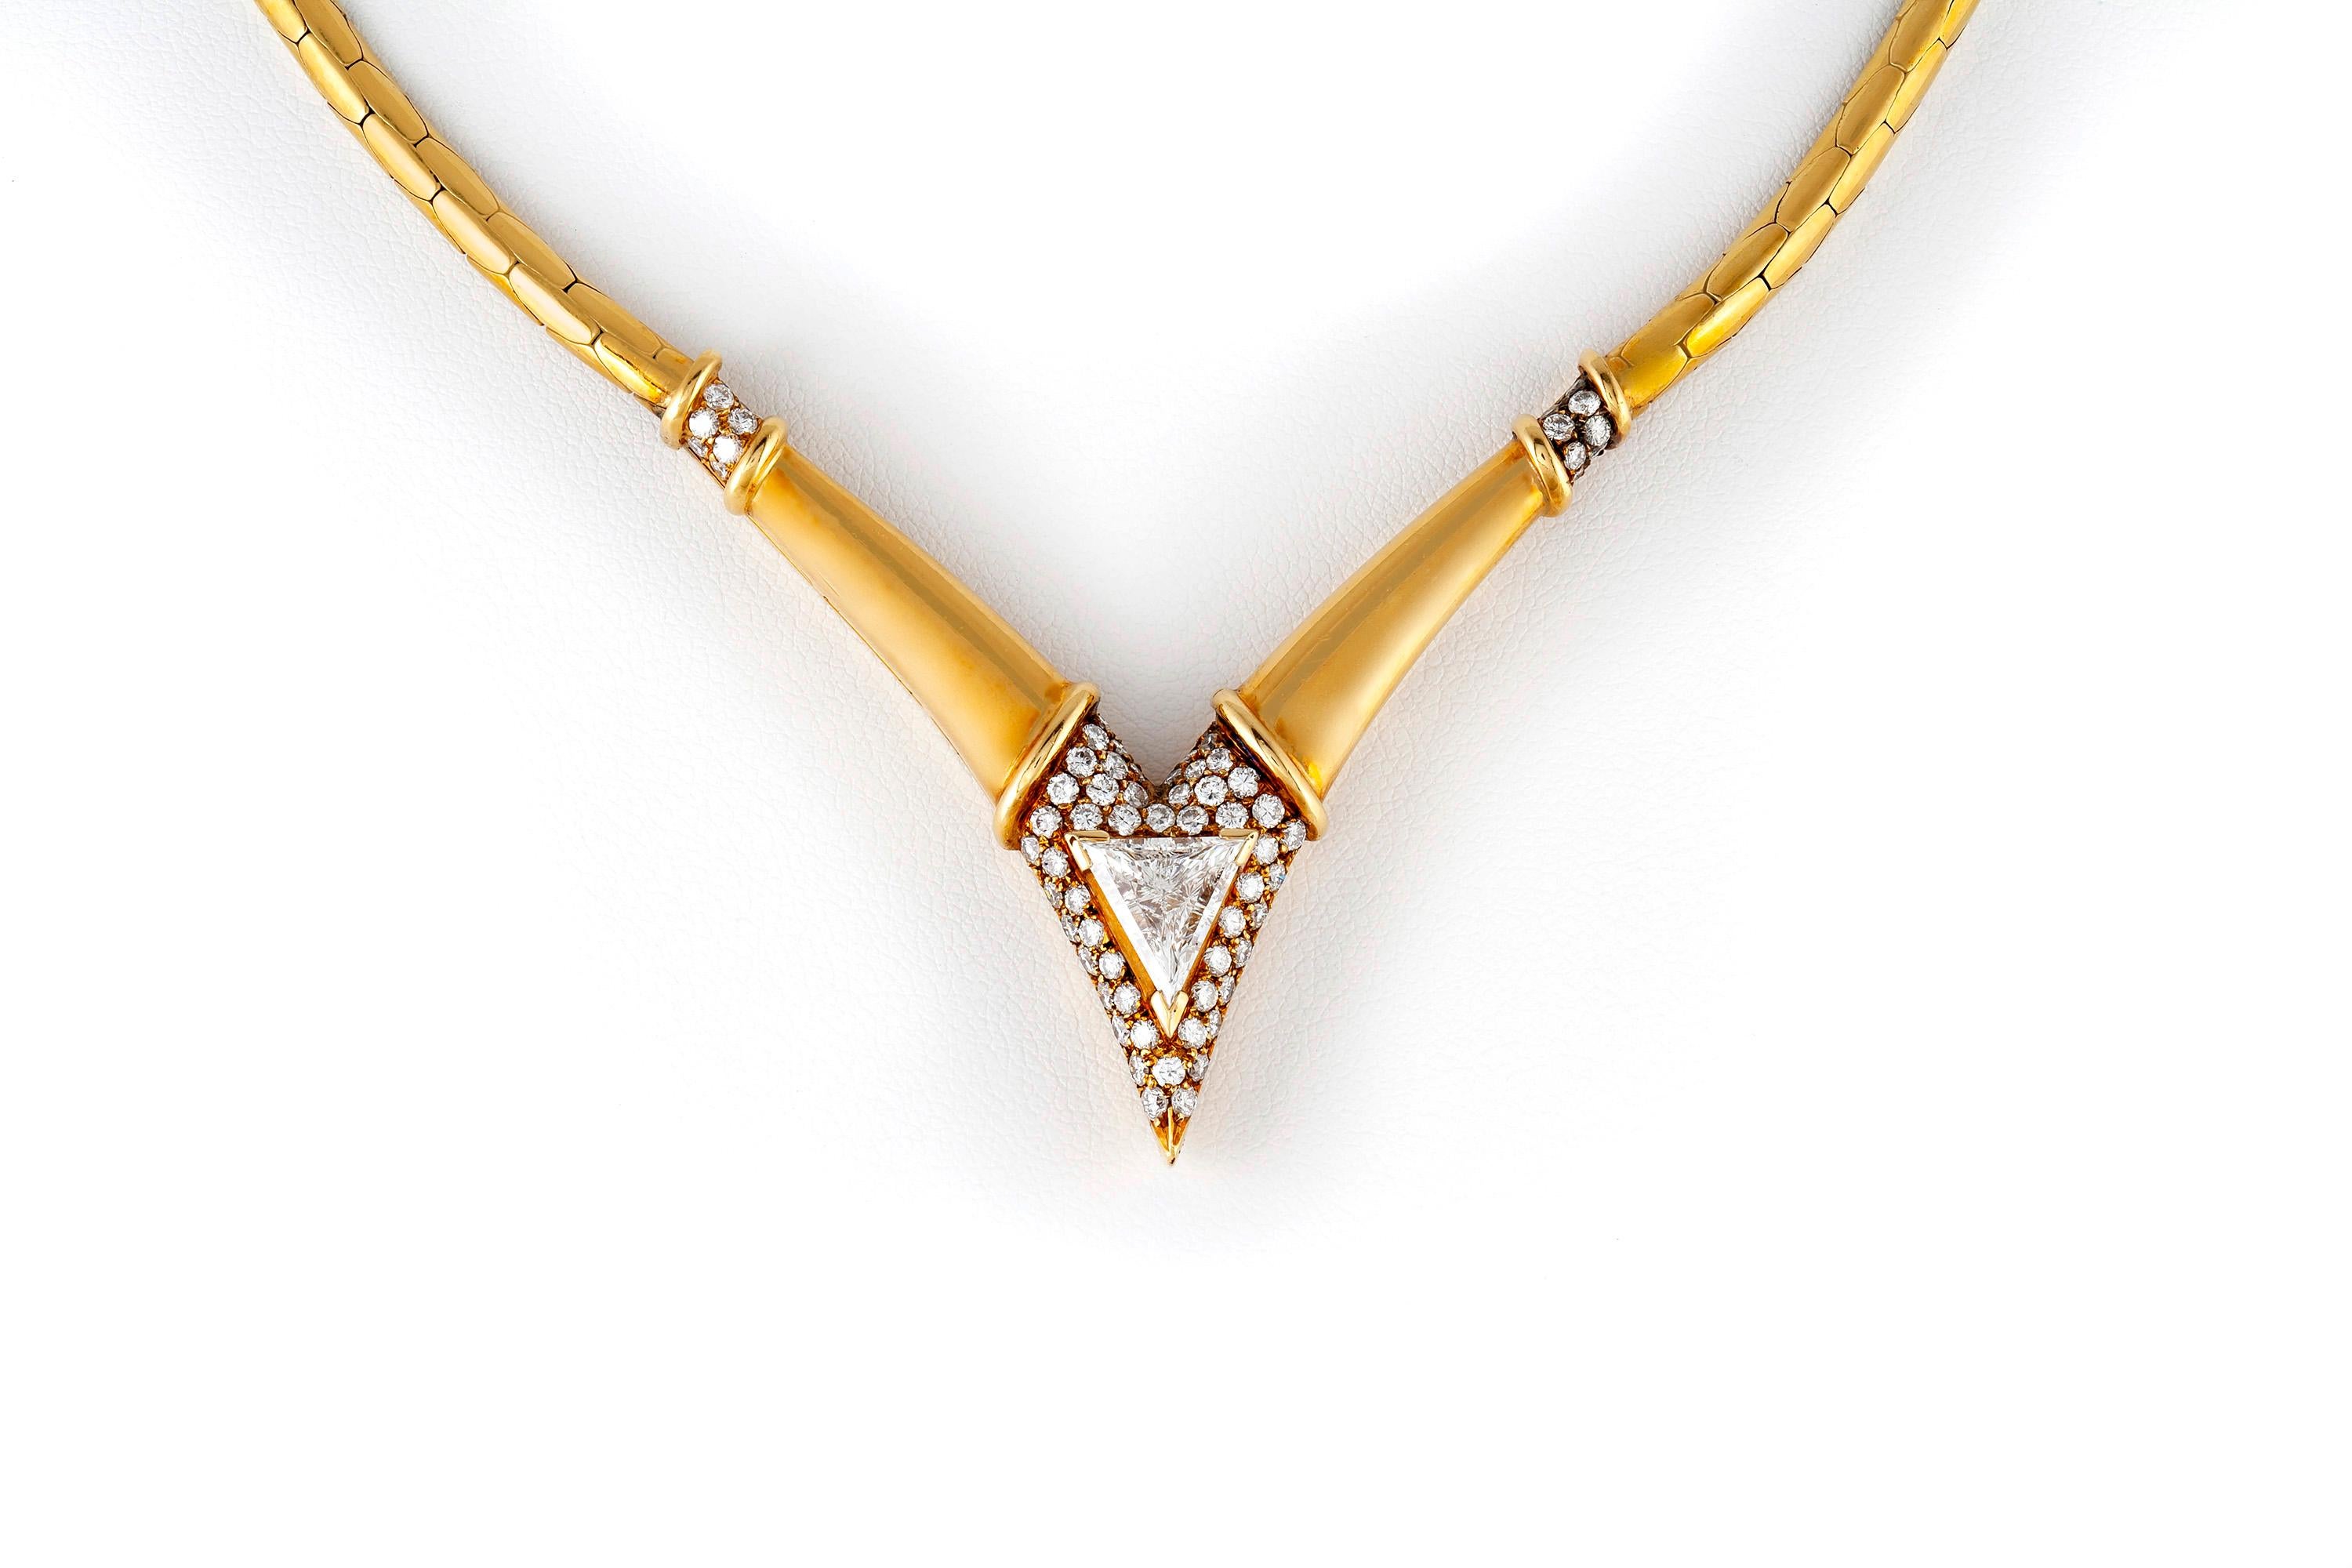 Vintage necklace, finaley crafted in 18k yellow gold, featuring trillion cut diamond weighing approximately 1.80 carats and brilliant cut diamonds, weighing a total of approximately 2.25 carats. 
Circa 1980's. 